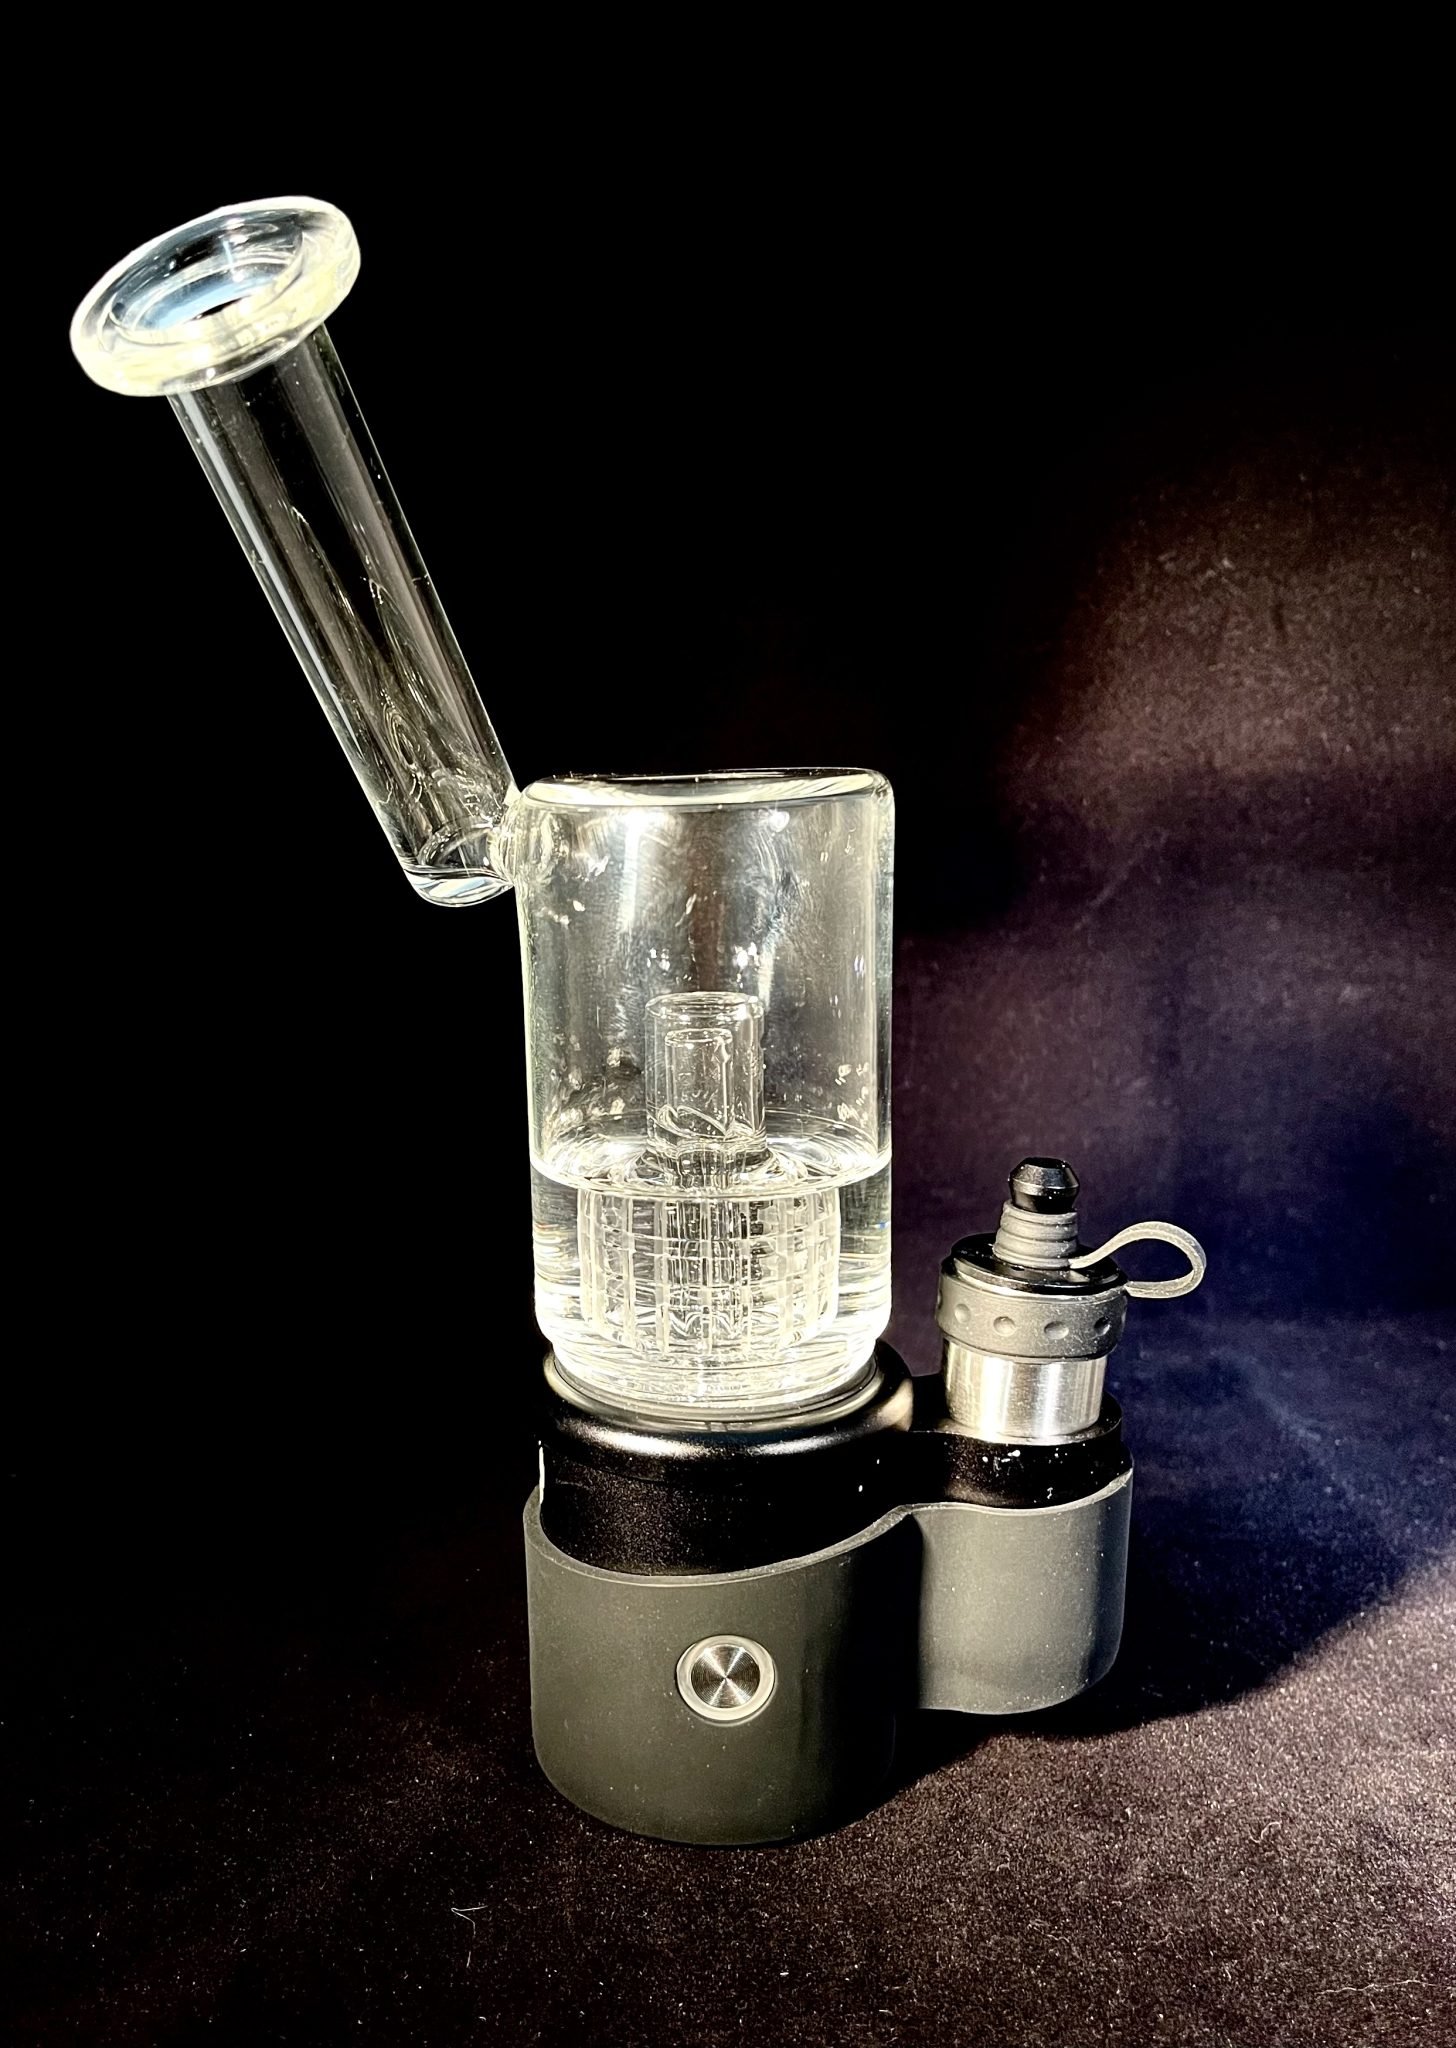 the-core-2-0-w-nice-dreamz-coil-portable-erig-for-concentrates